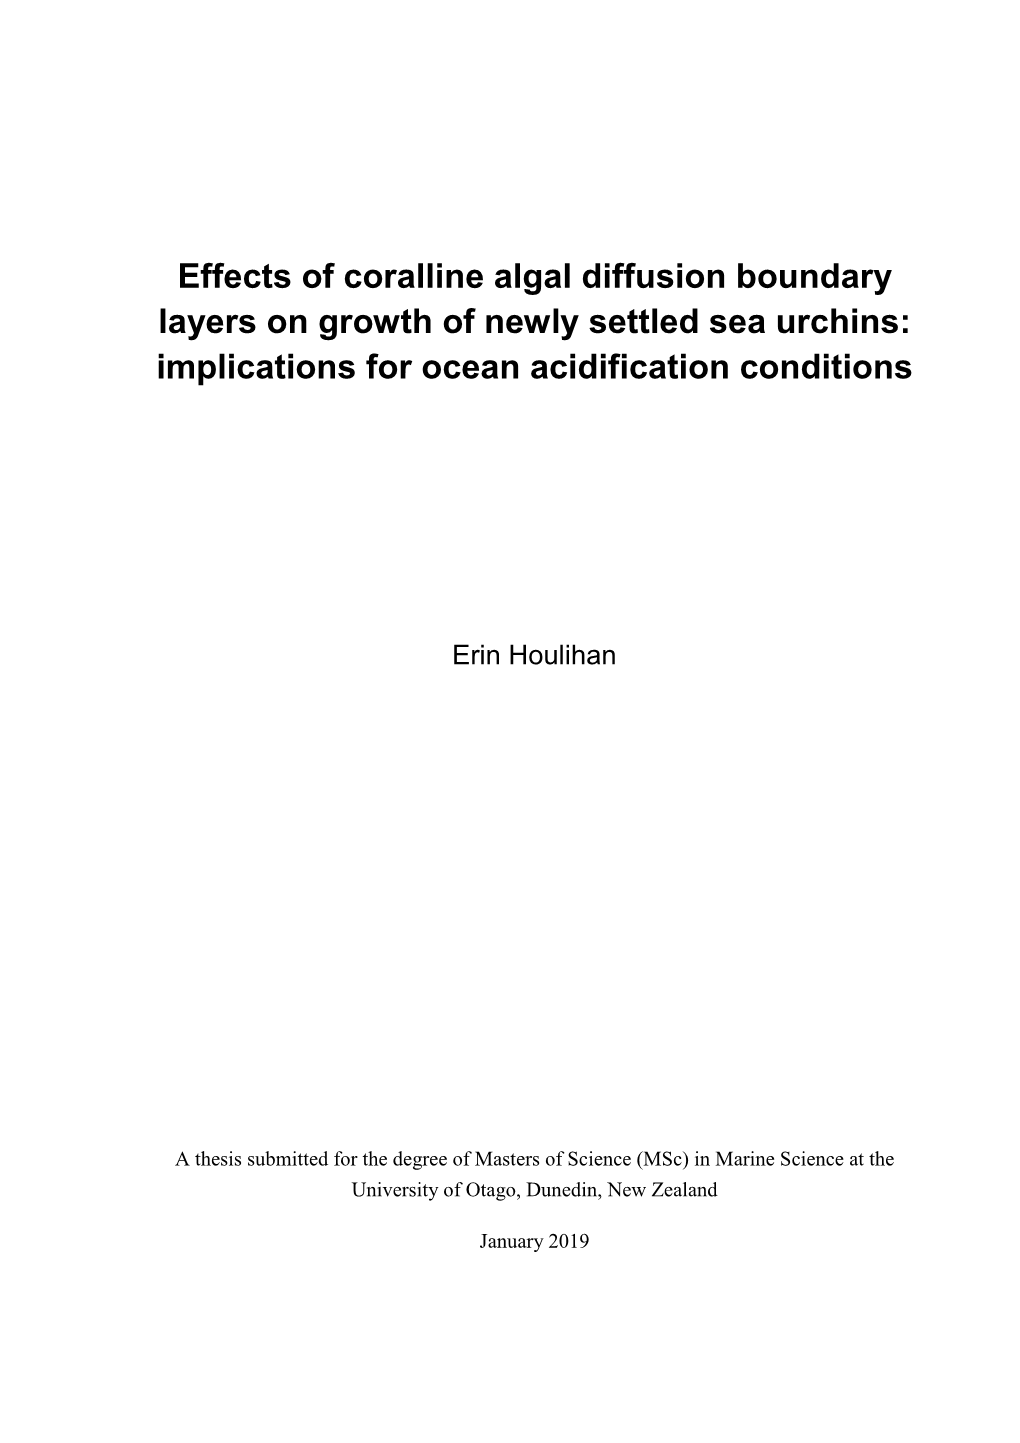 Effects of Coralline Algal Diffusion Boundary Layers on Growth of Newly Settled Sea Urchins: Implications for Ocean Acidification Conditions